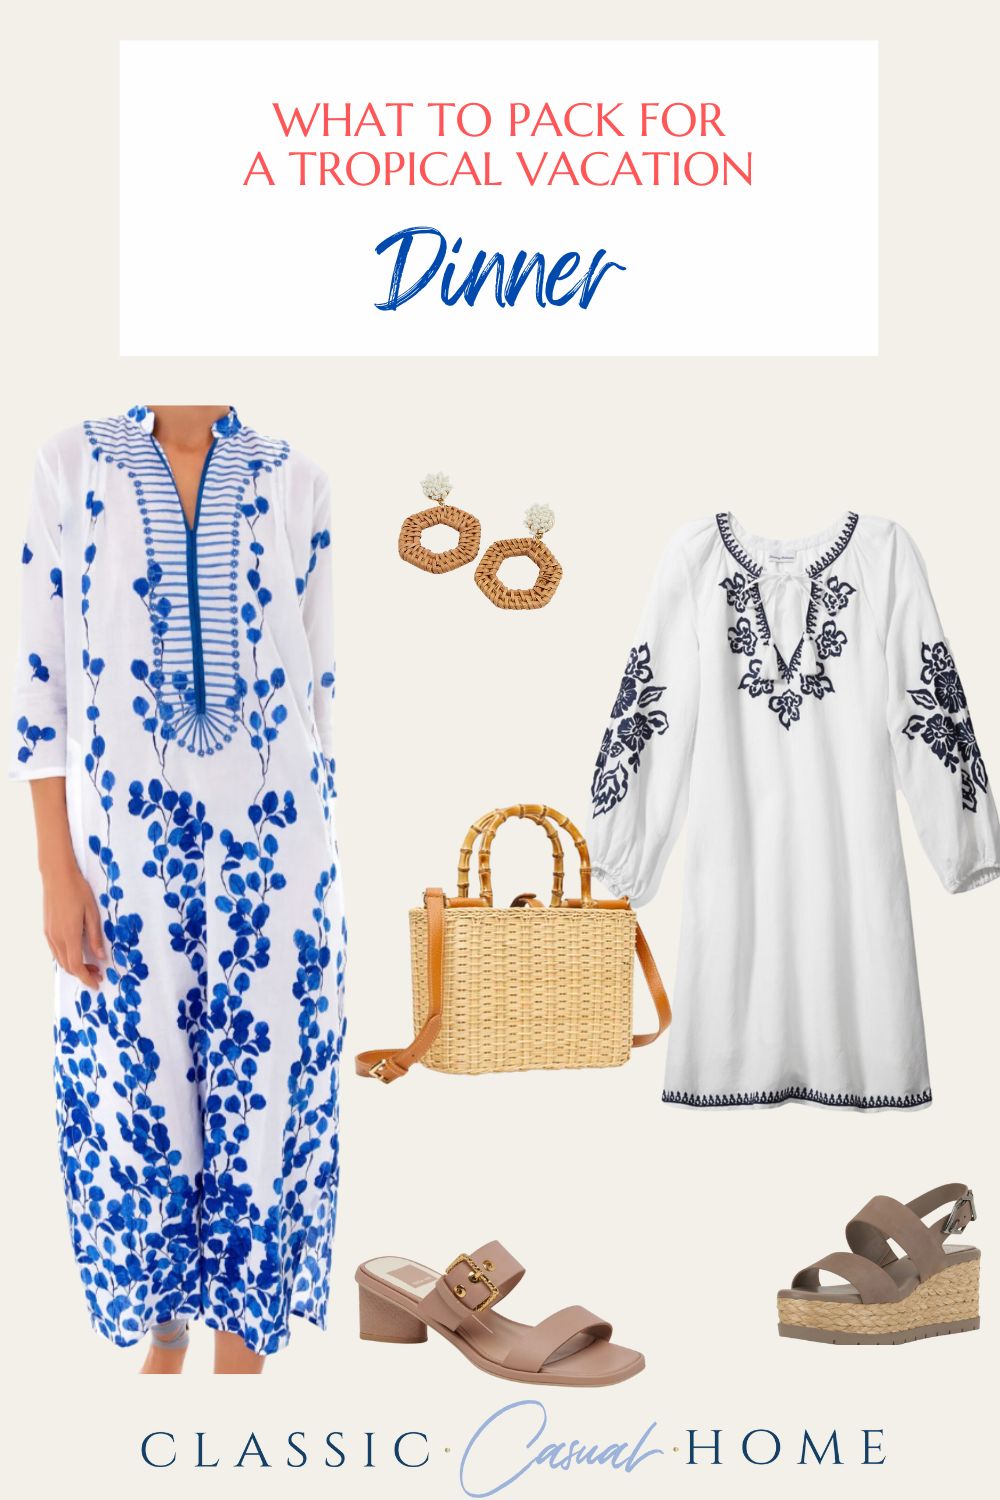 dresses to wear for a tropical dinner